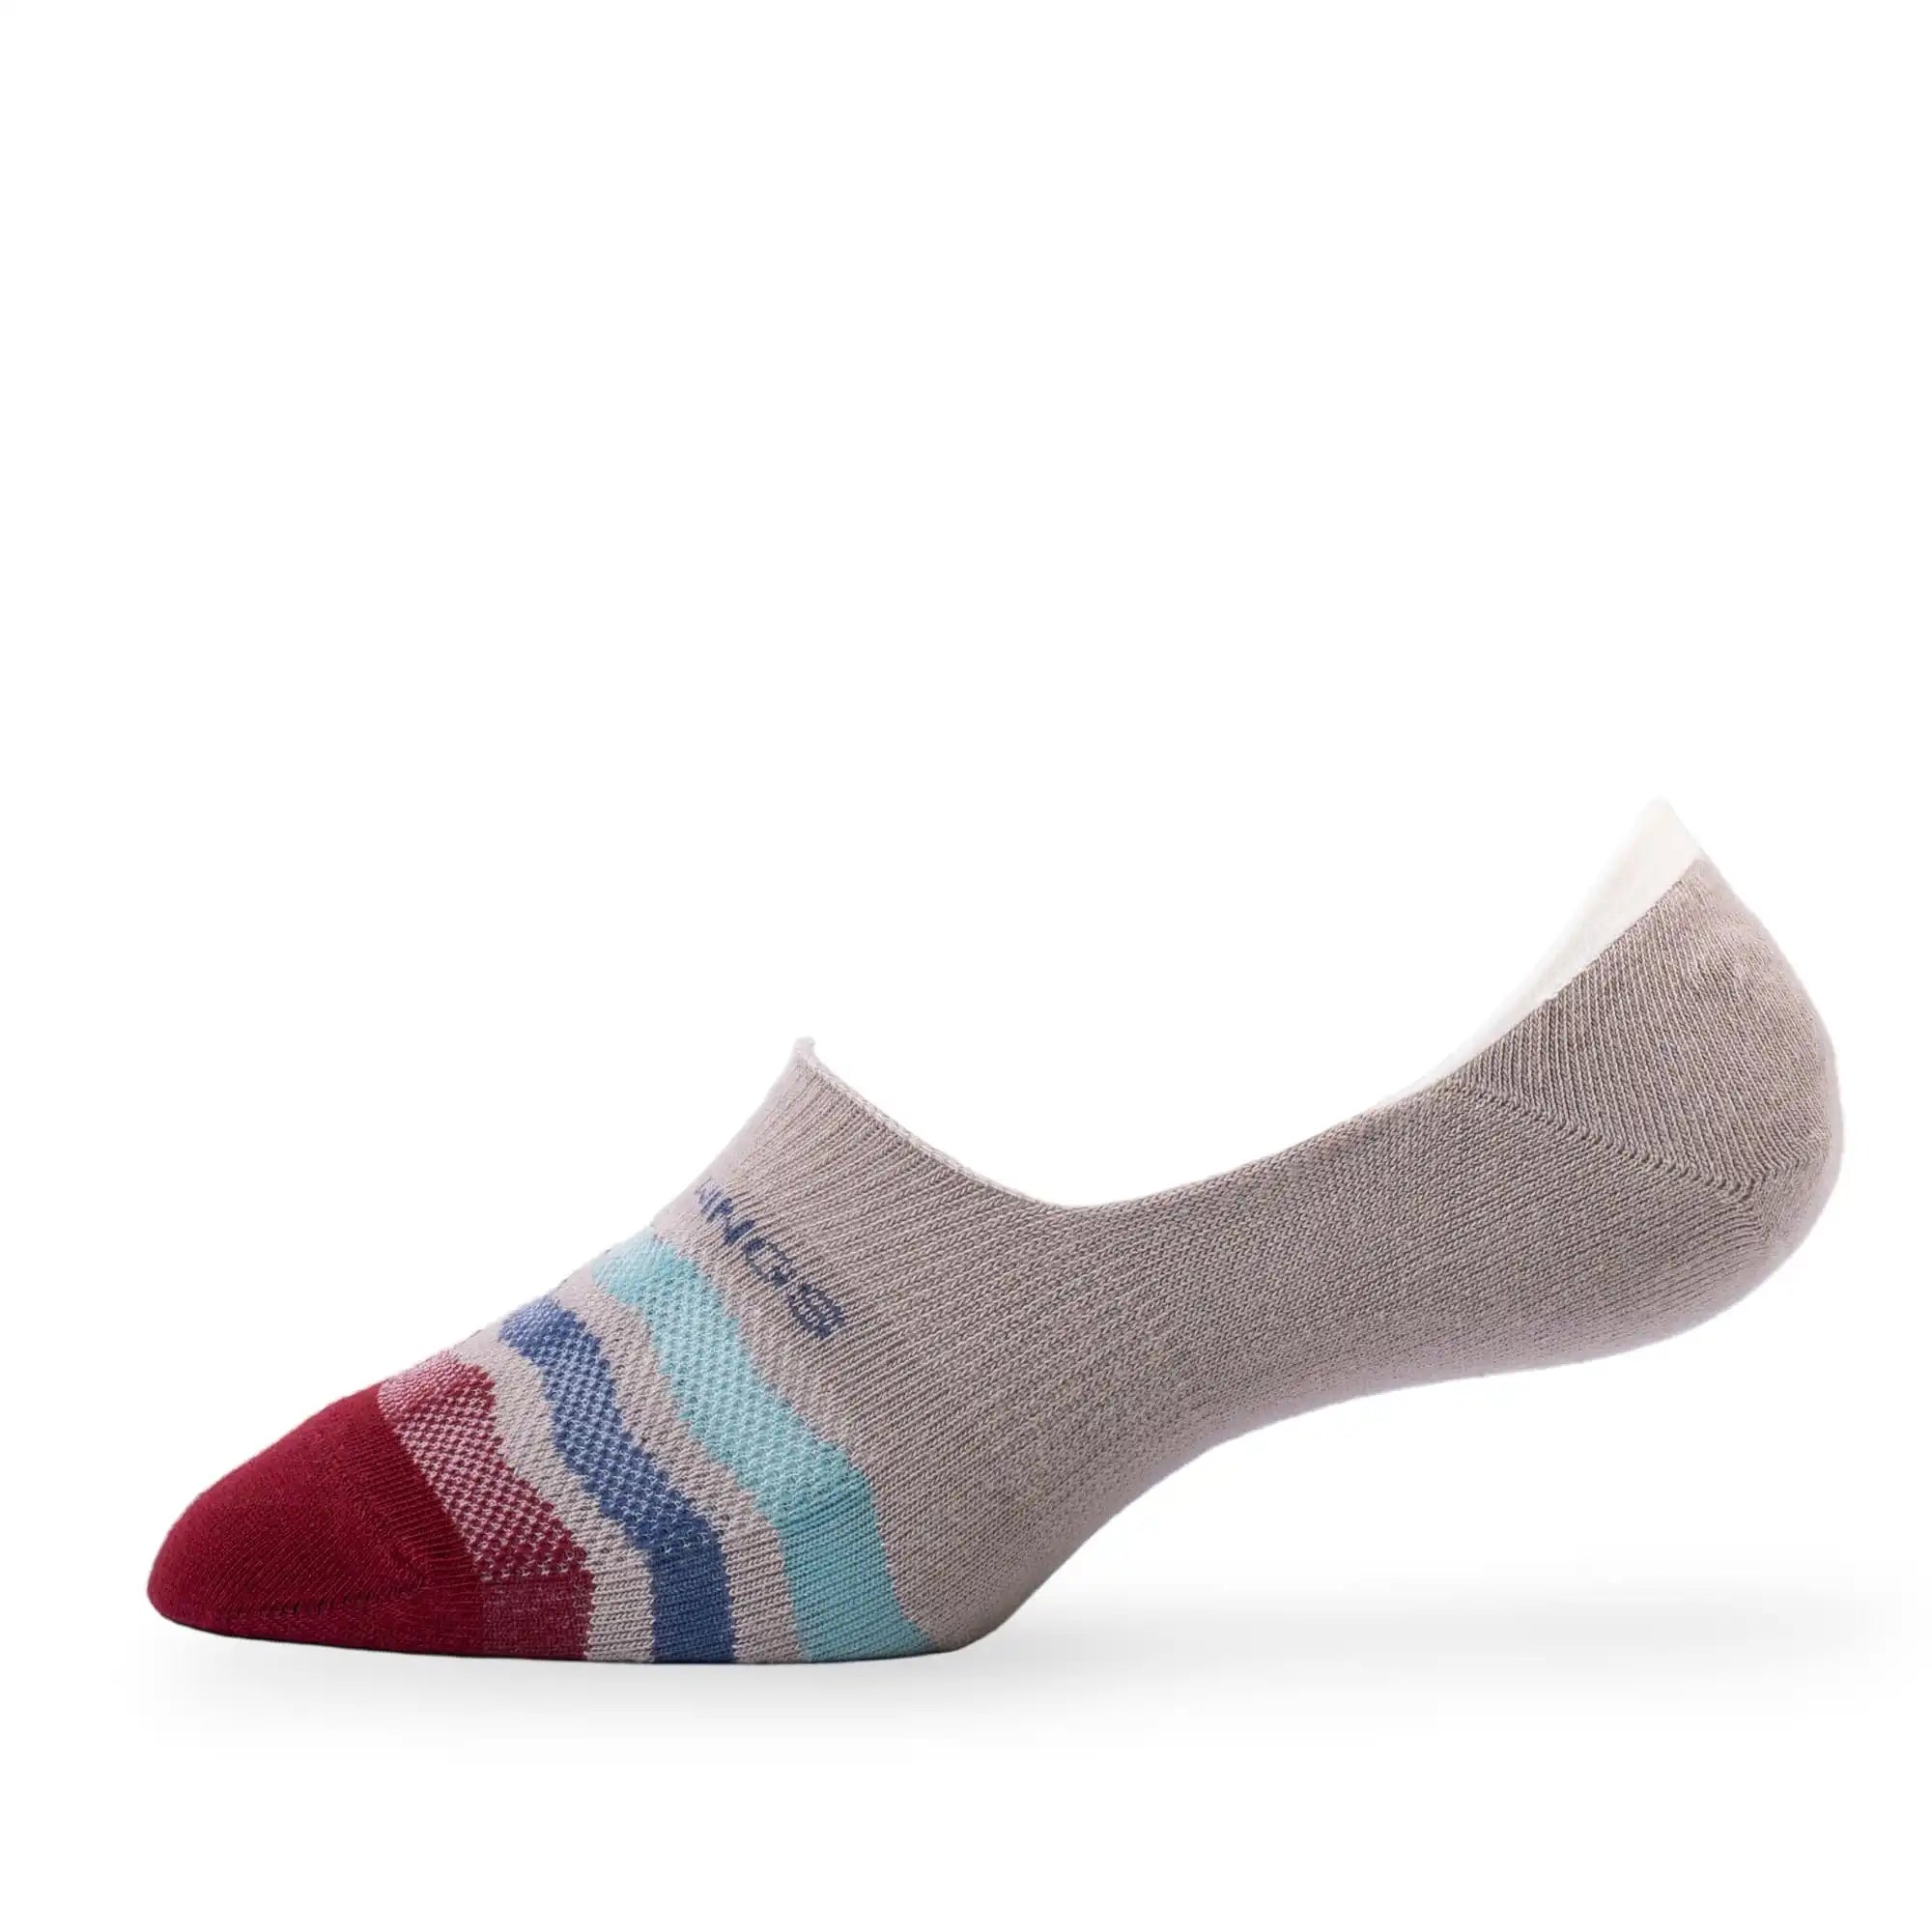 Young Wings Women's Multi Colour Cotton Fabric Design No-Show Socks - Pack of 5, Style no. 9007-W1